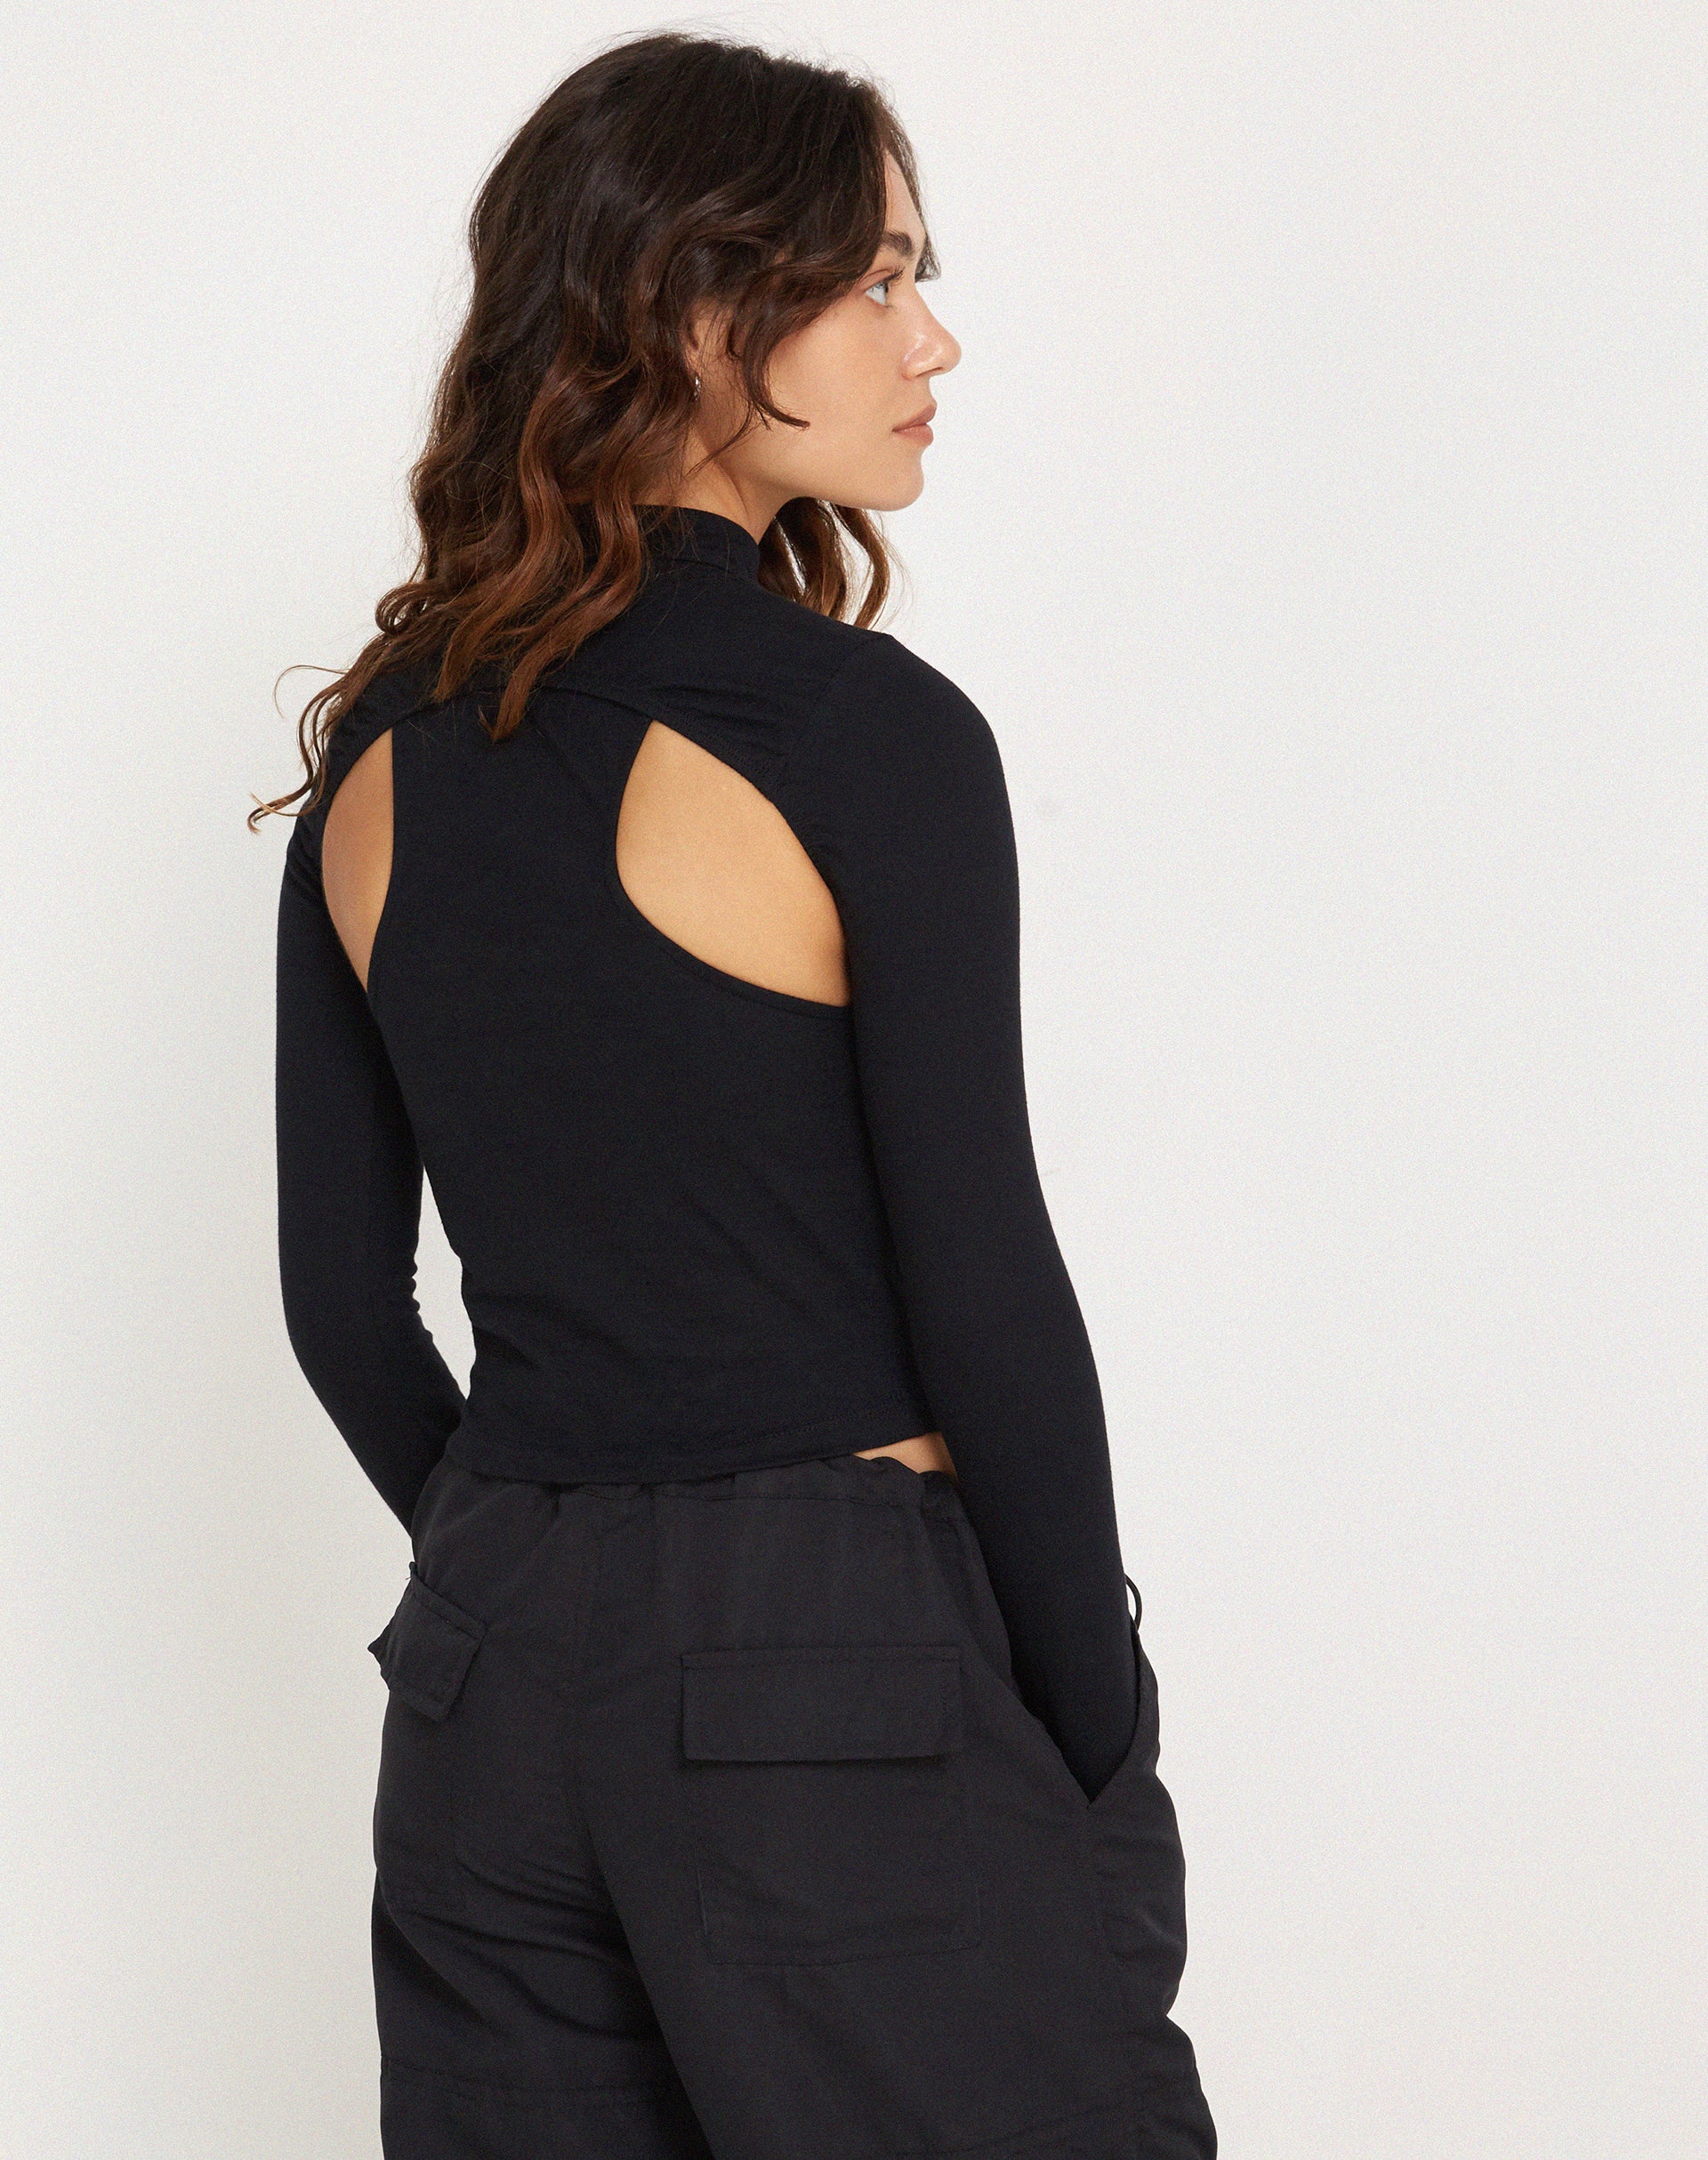 image of Bandi Long Sleeve High Neck Cut Out Top in Black